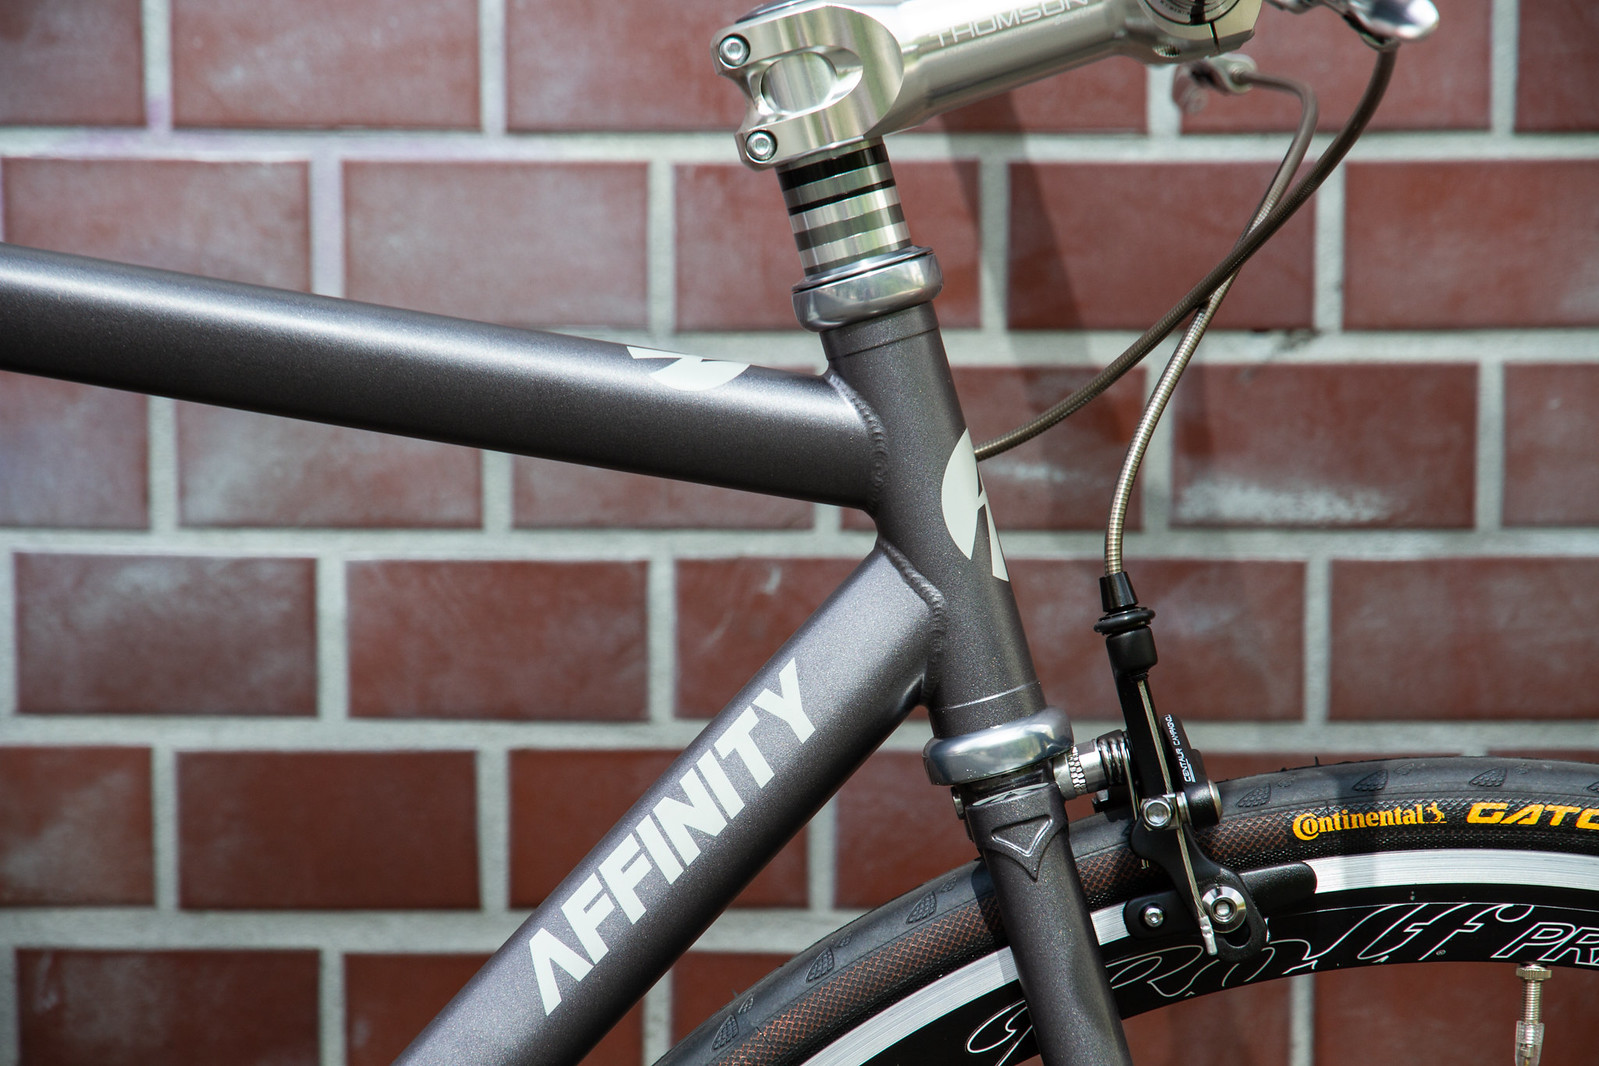 *AFFINITY CYCLES* lo pro (M)